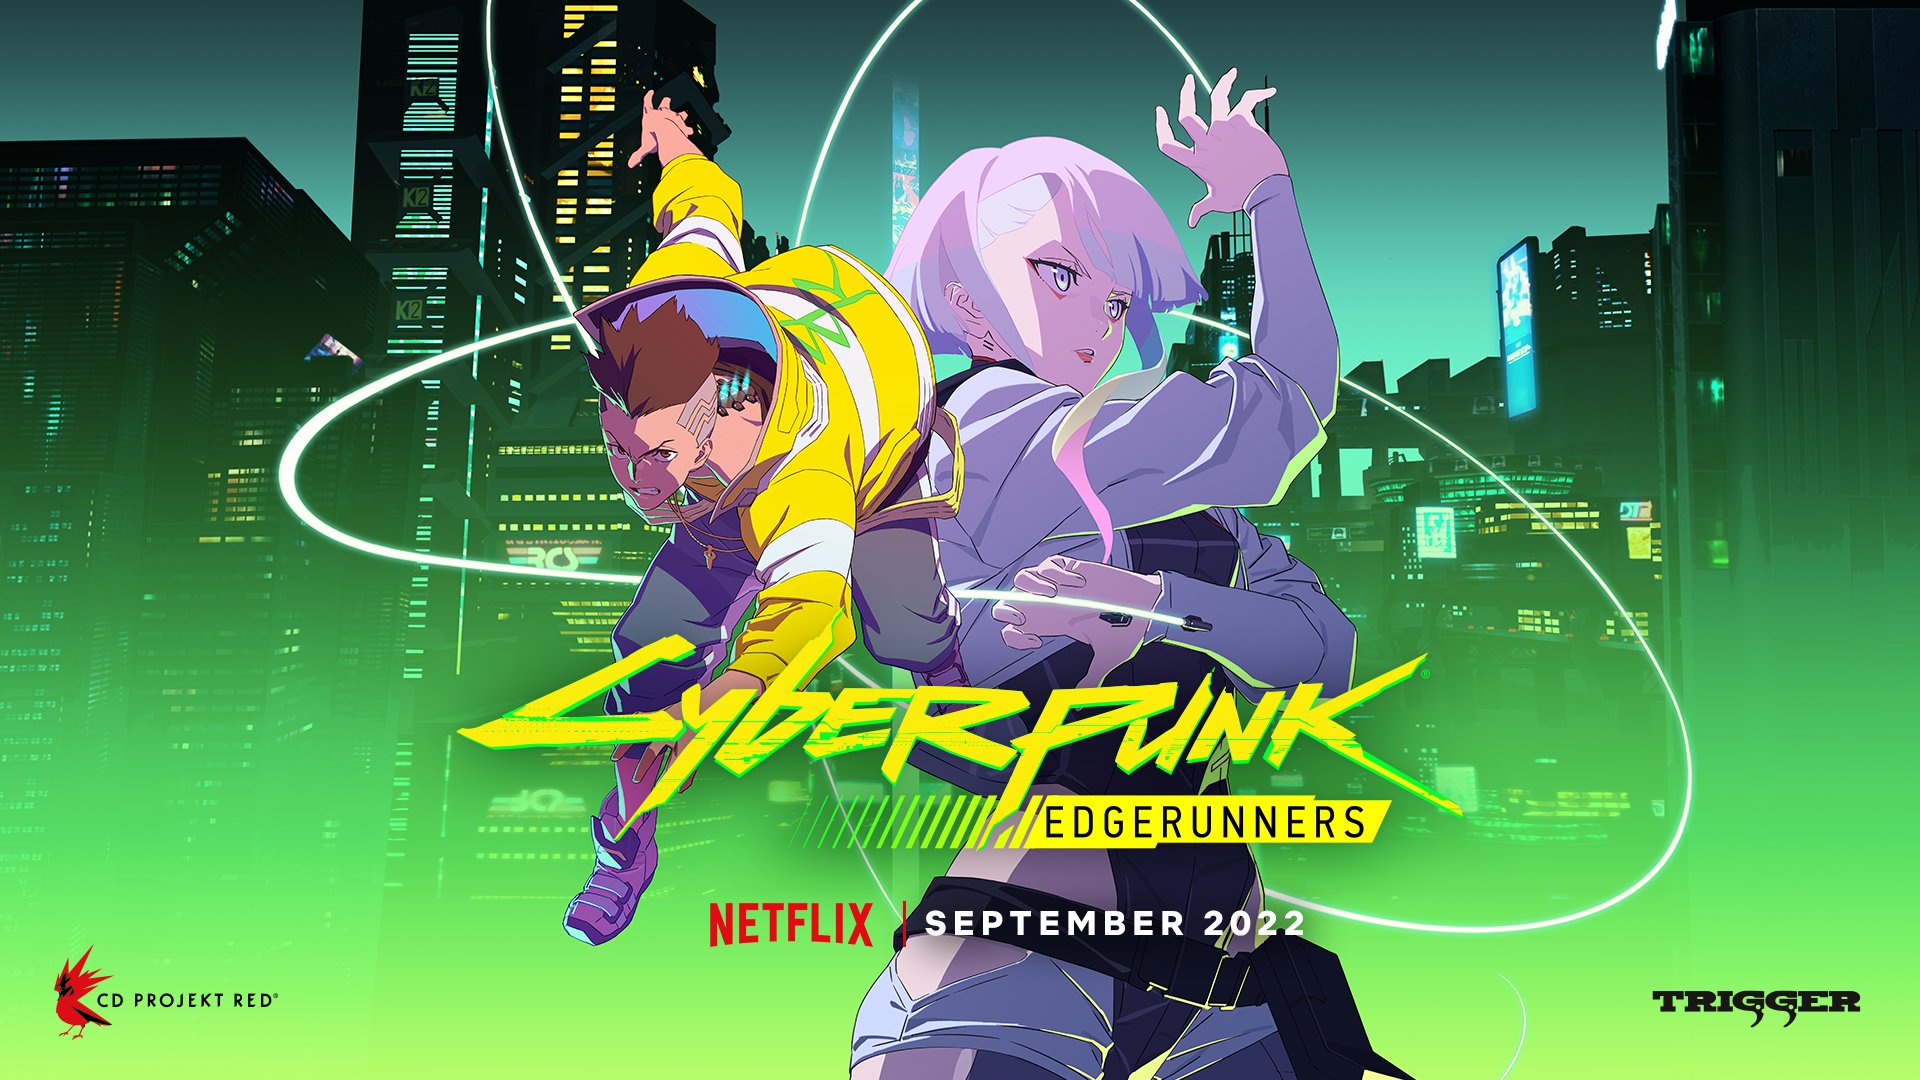 Cyberpunk: Edgerunners our protagonists, David and Lucy, drawn by the chief character designer of the show Yoh Yoshinari! Cyberpunk: Edgerunners is coming to Netflix in September 2022. #Edgerunners #GeekedWeek